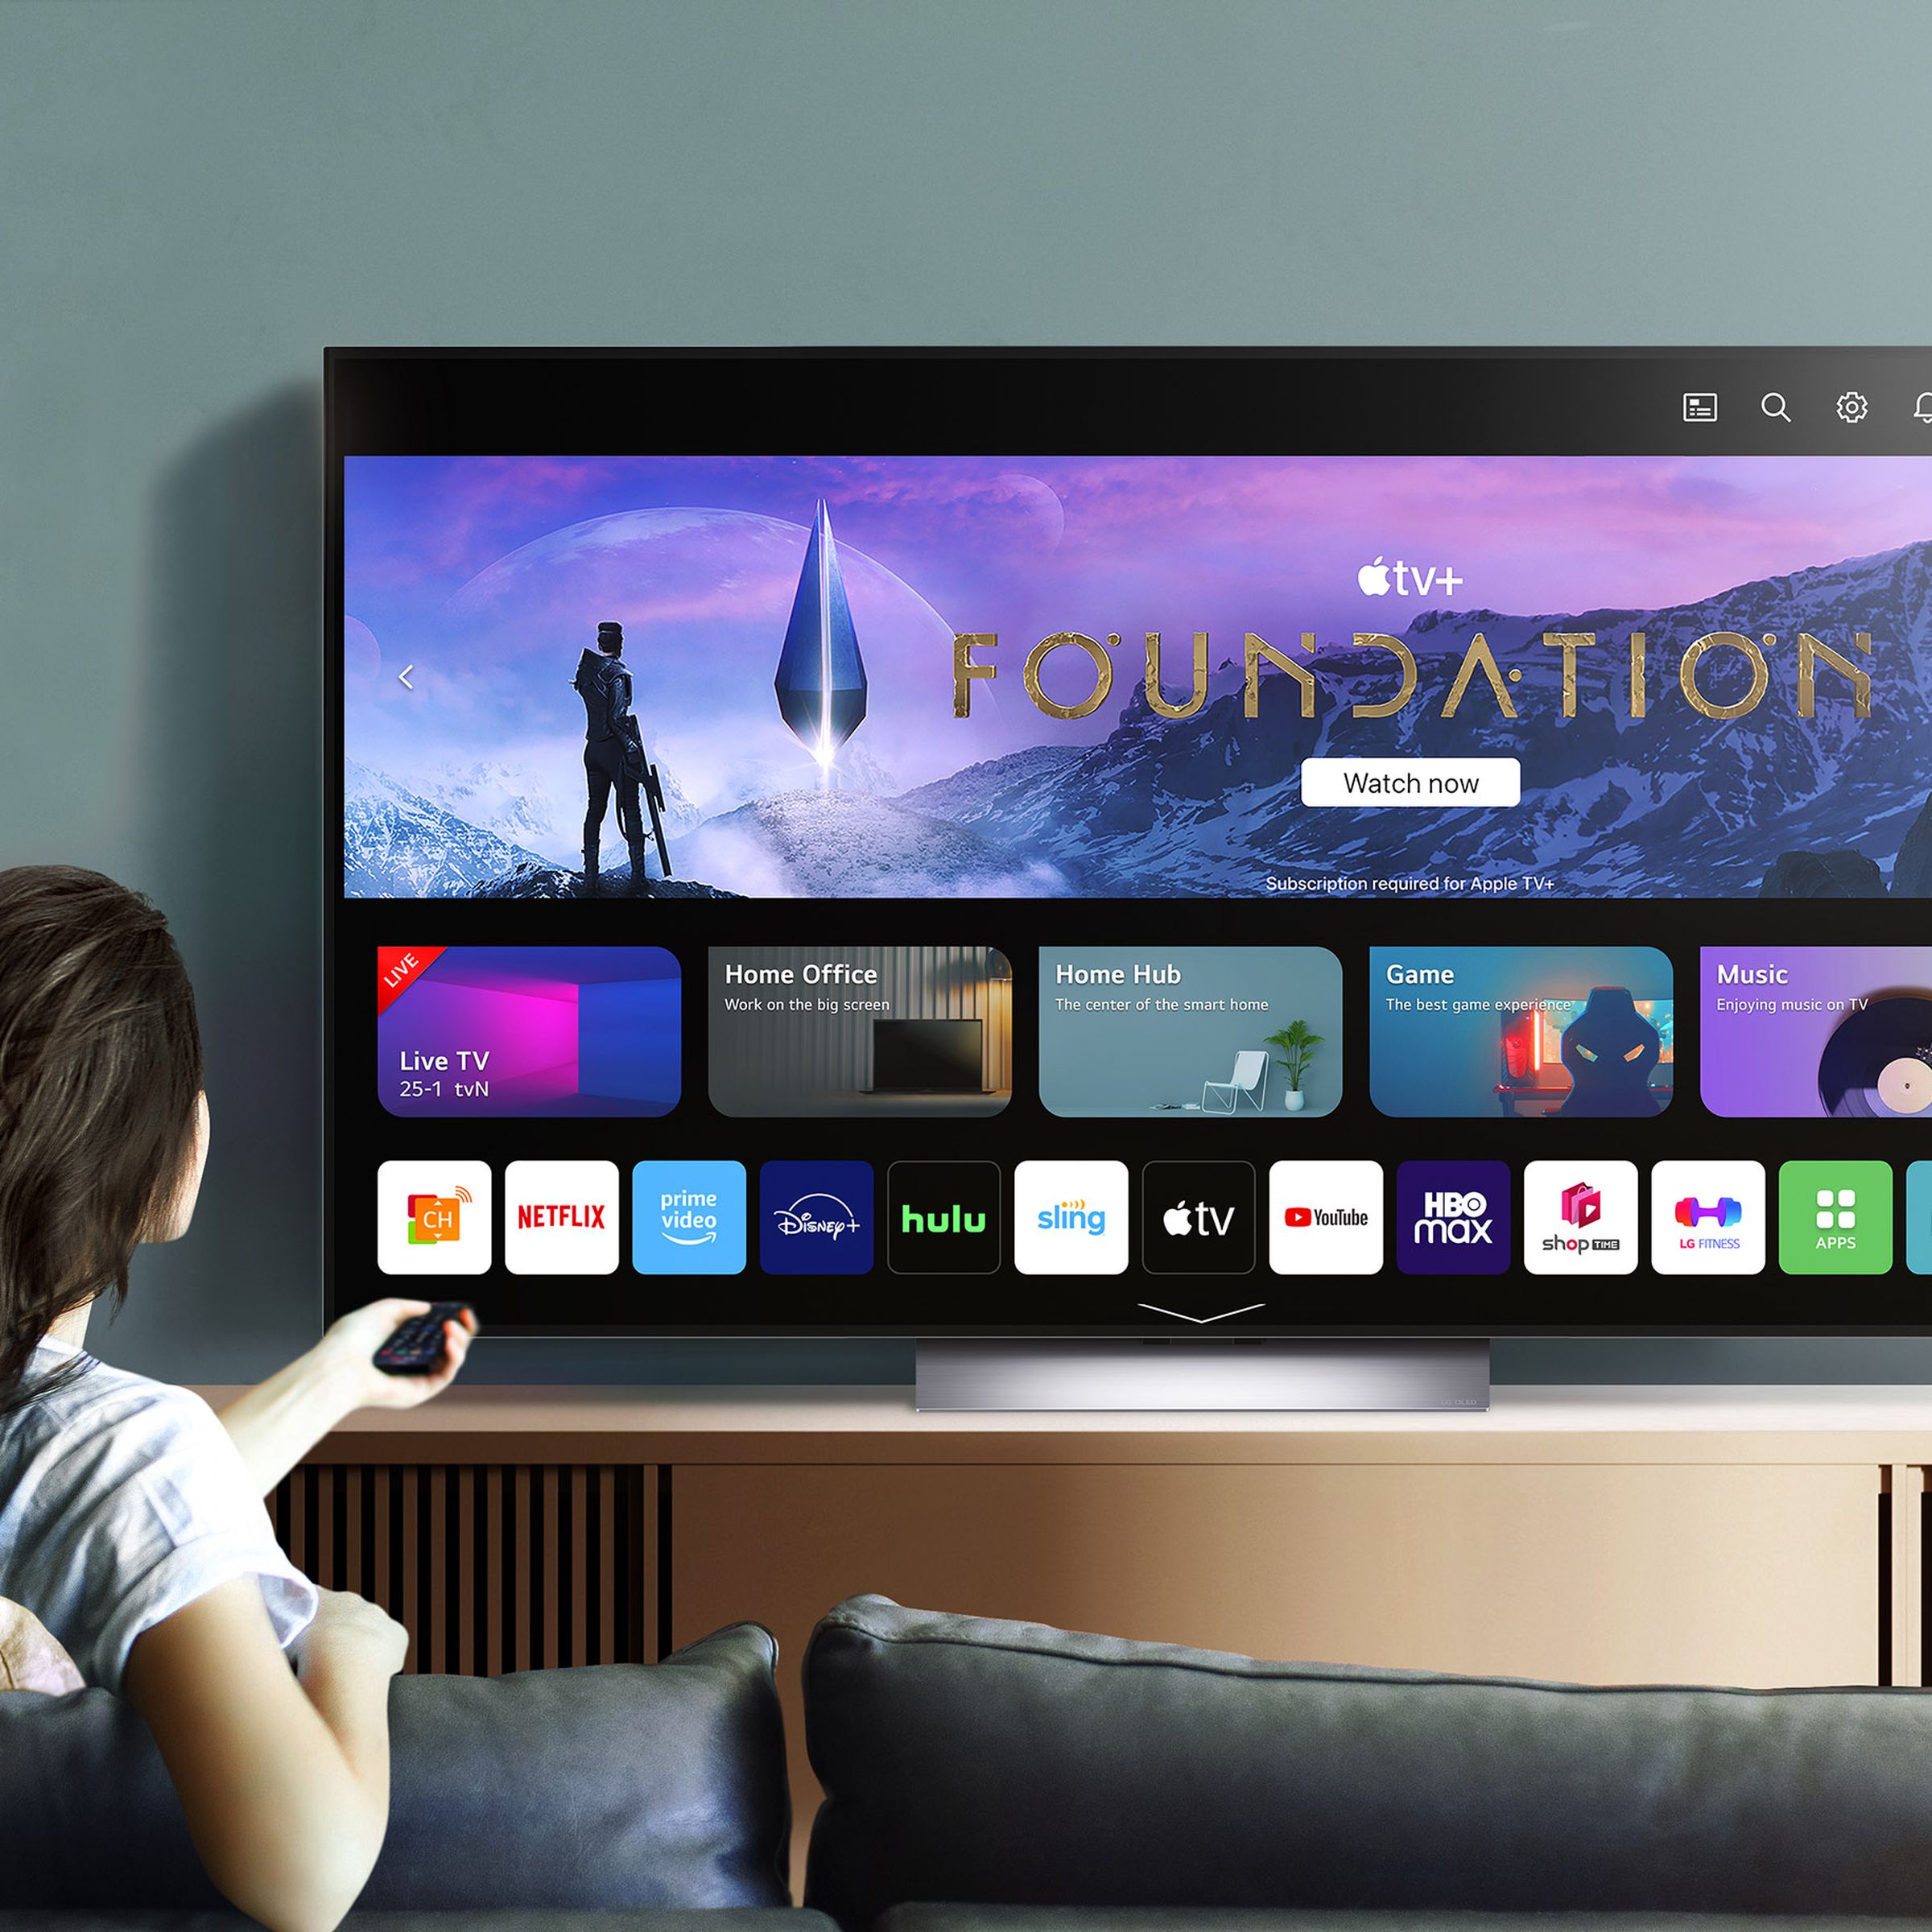 An image of an LG OLED TV on the home screen with a person sitting on a couch in front.